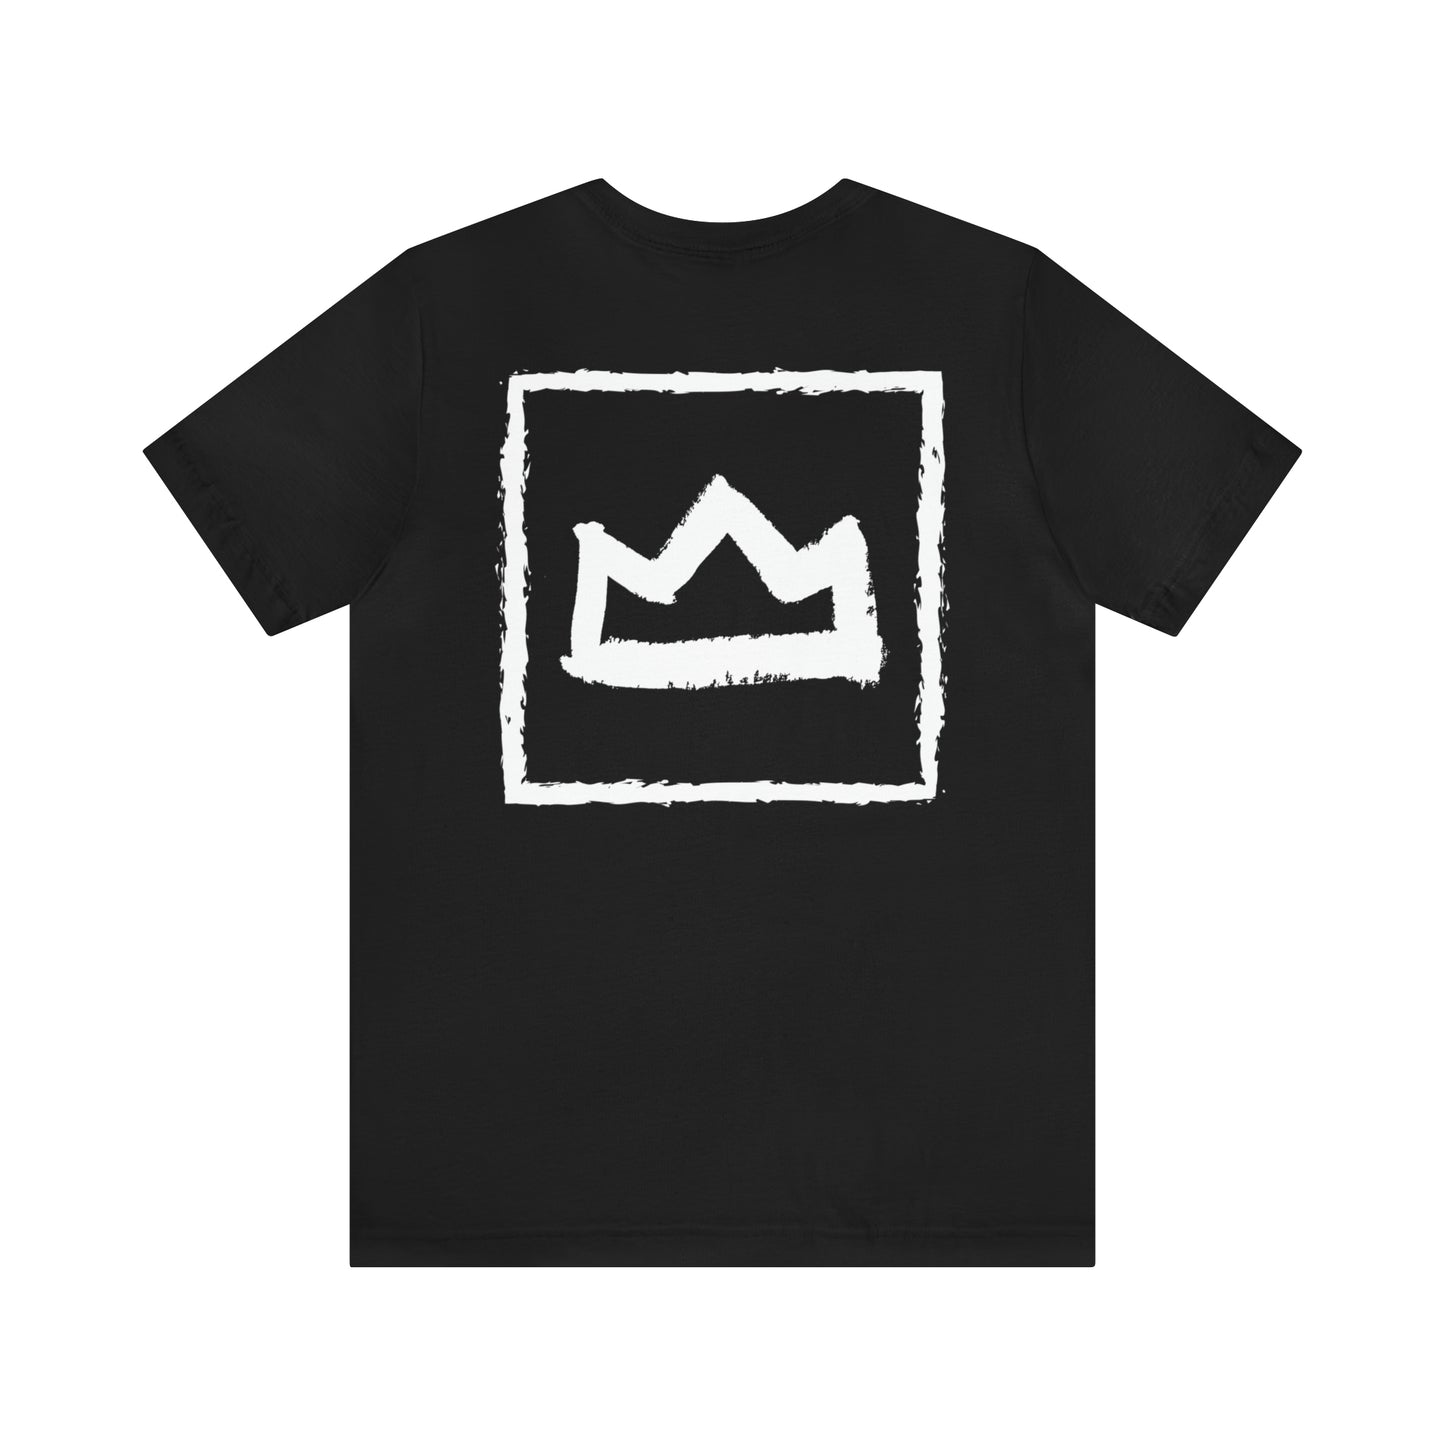 God Save The Queen T-shirt